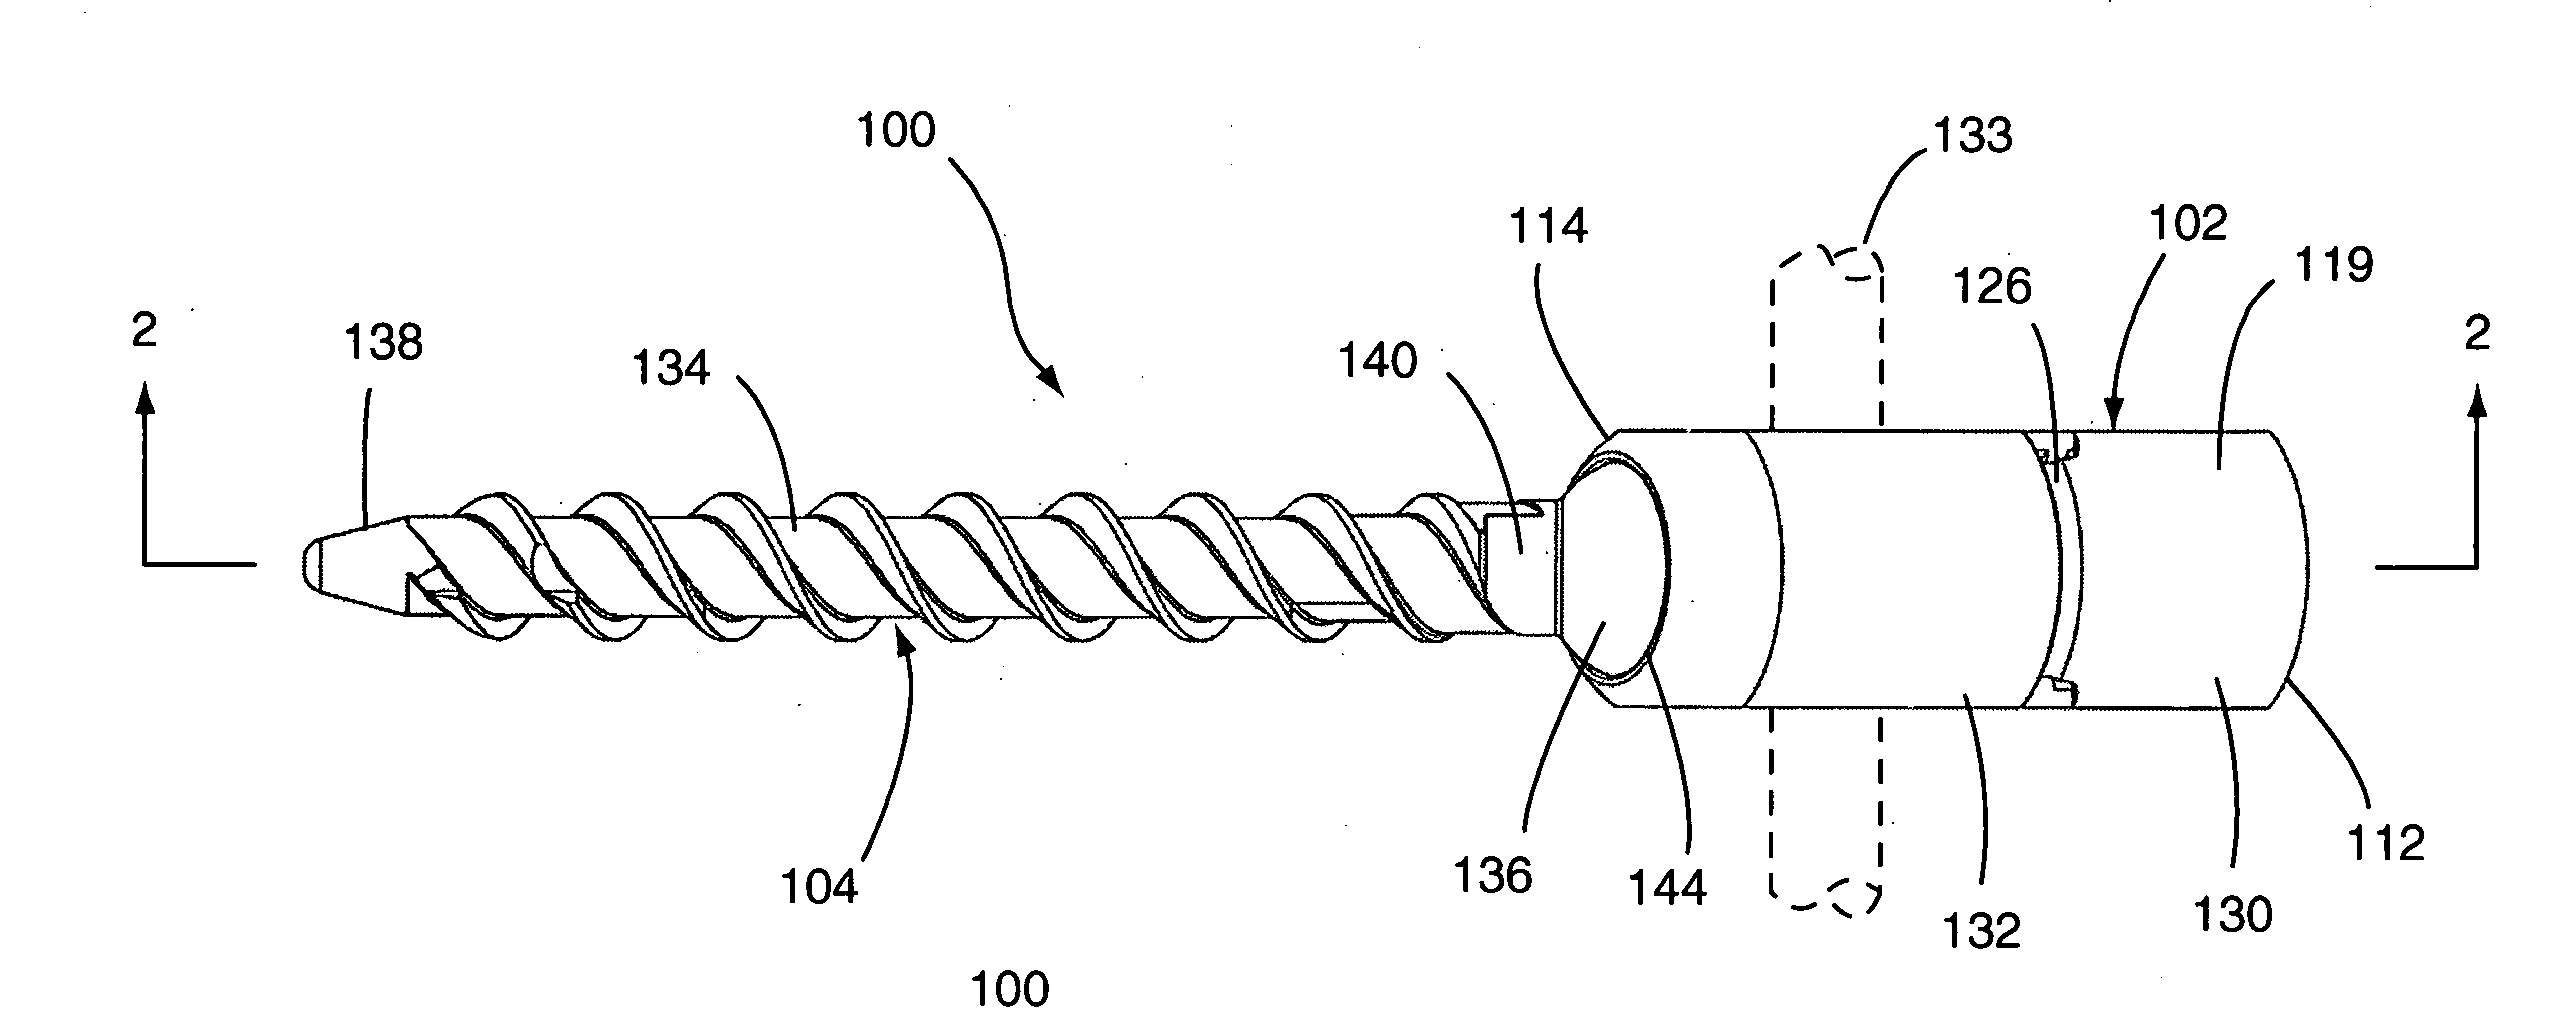 Poly-axial pedicle scre implements and lock screw therefor